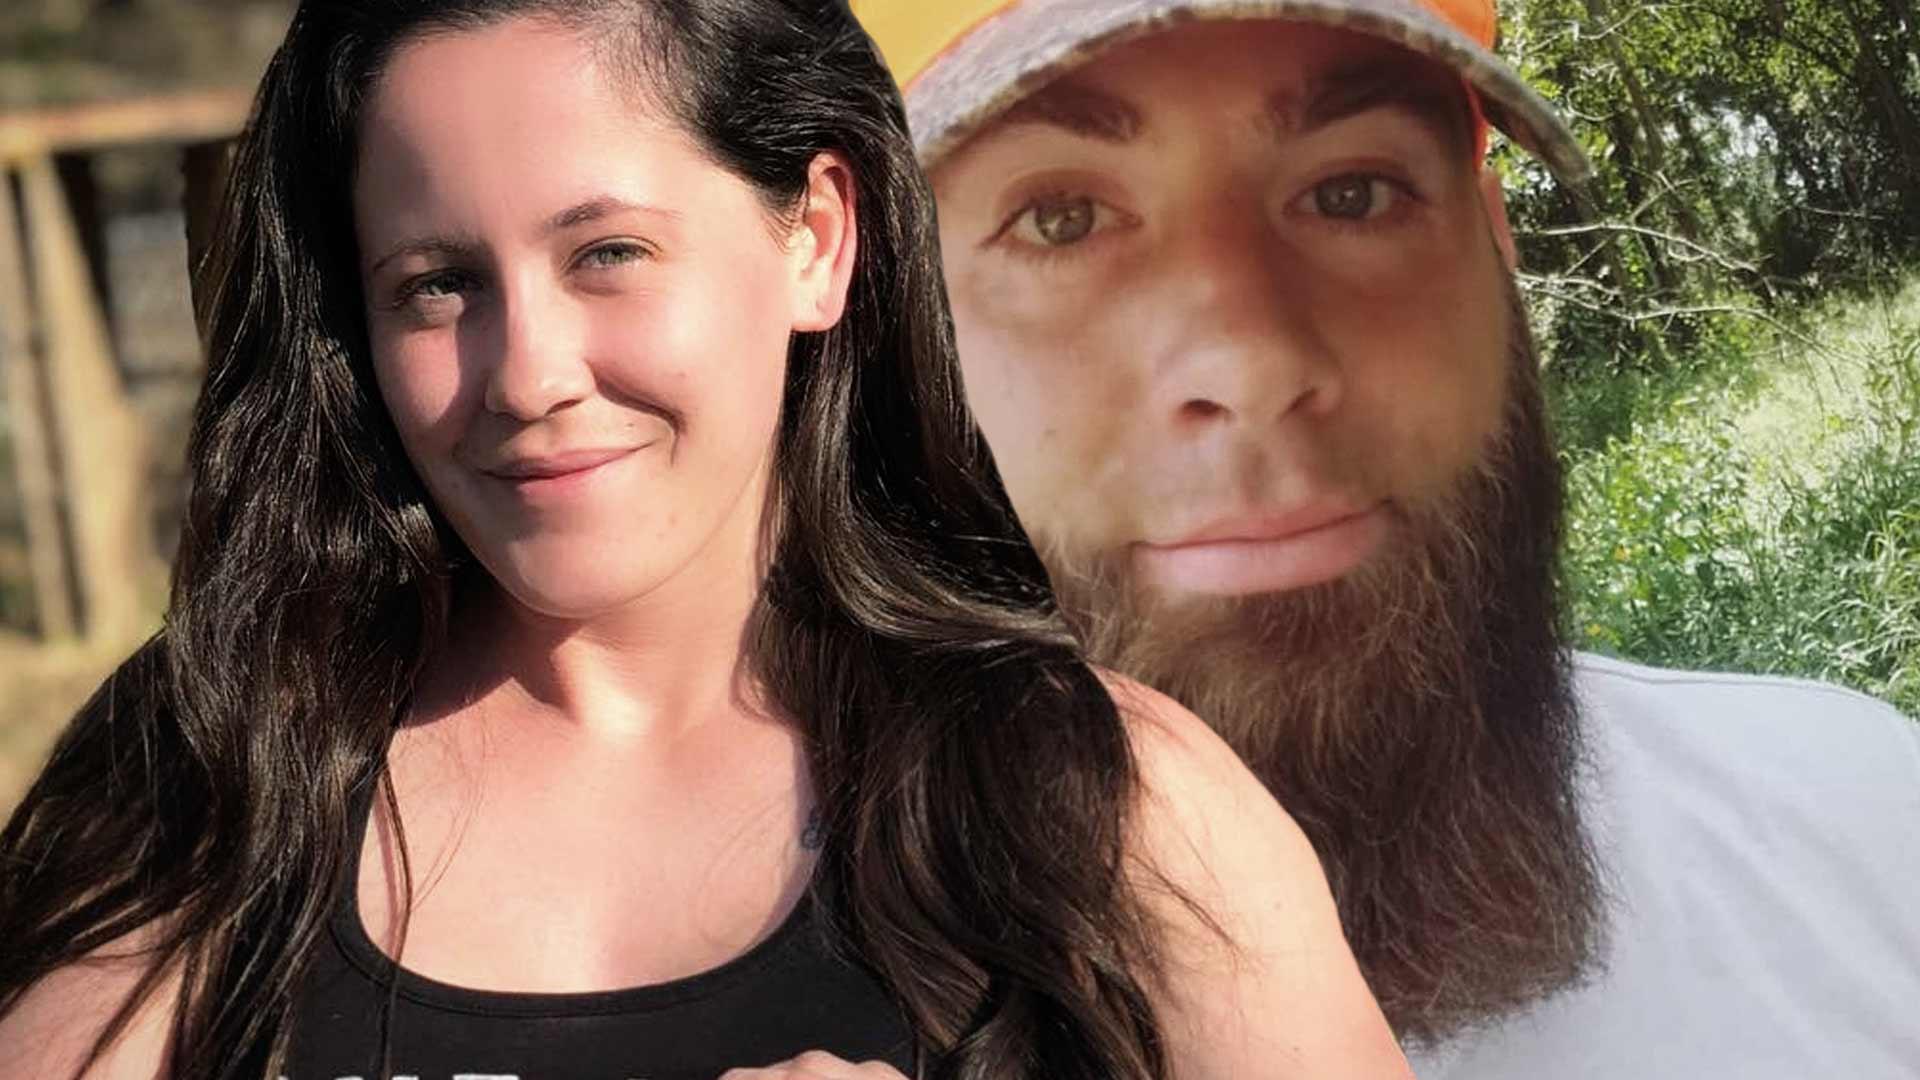 Ex-‘Teen Mom’ Star Jenelle Evans’ Reality Show Future is Bleak After Recent Incidents